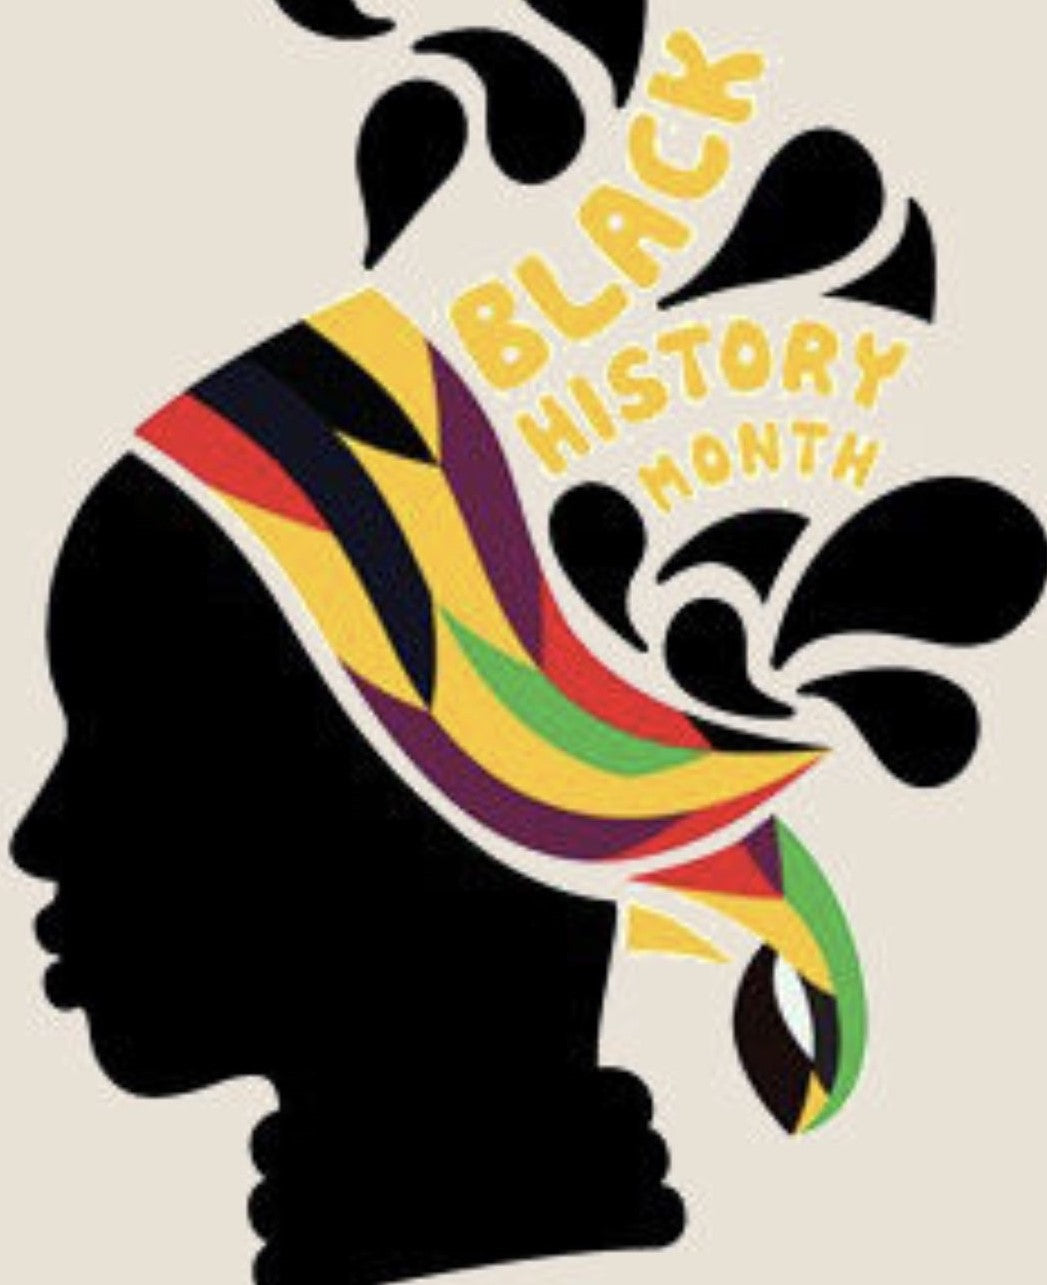 Join us as we celebrate Black History Month!